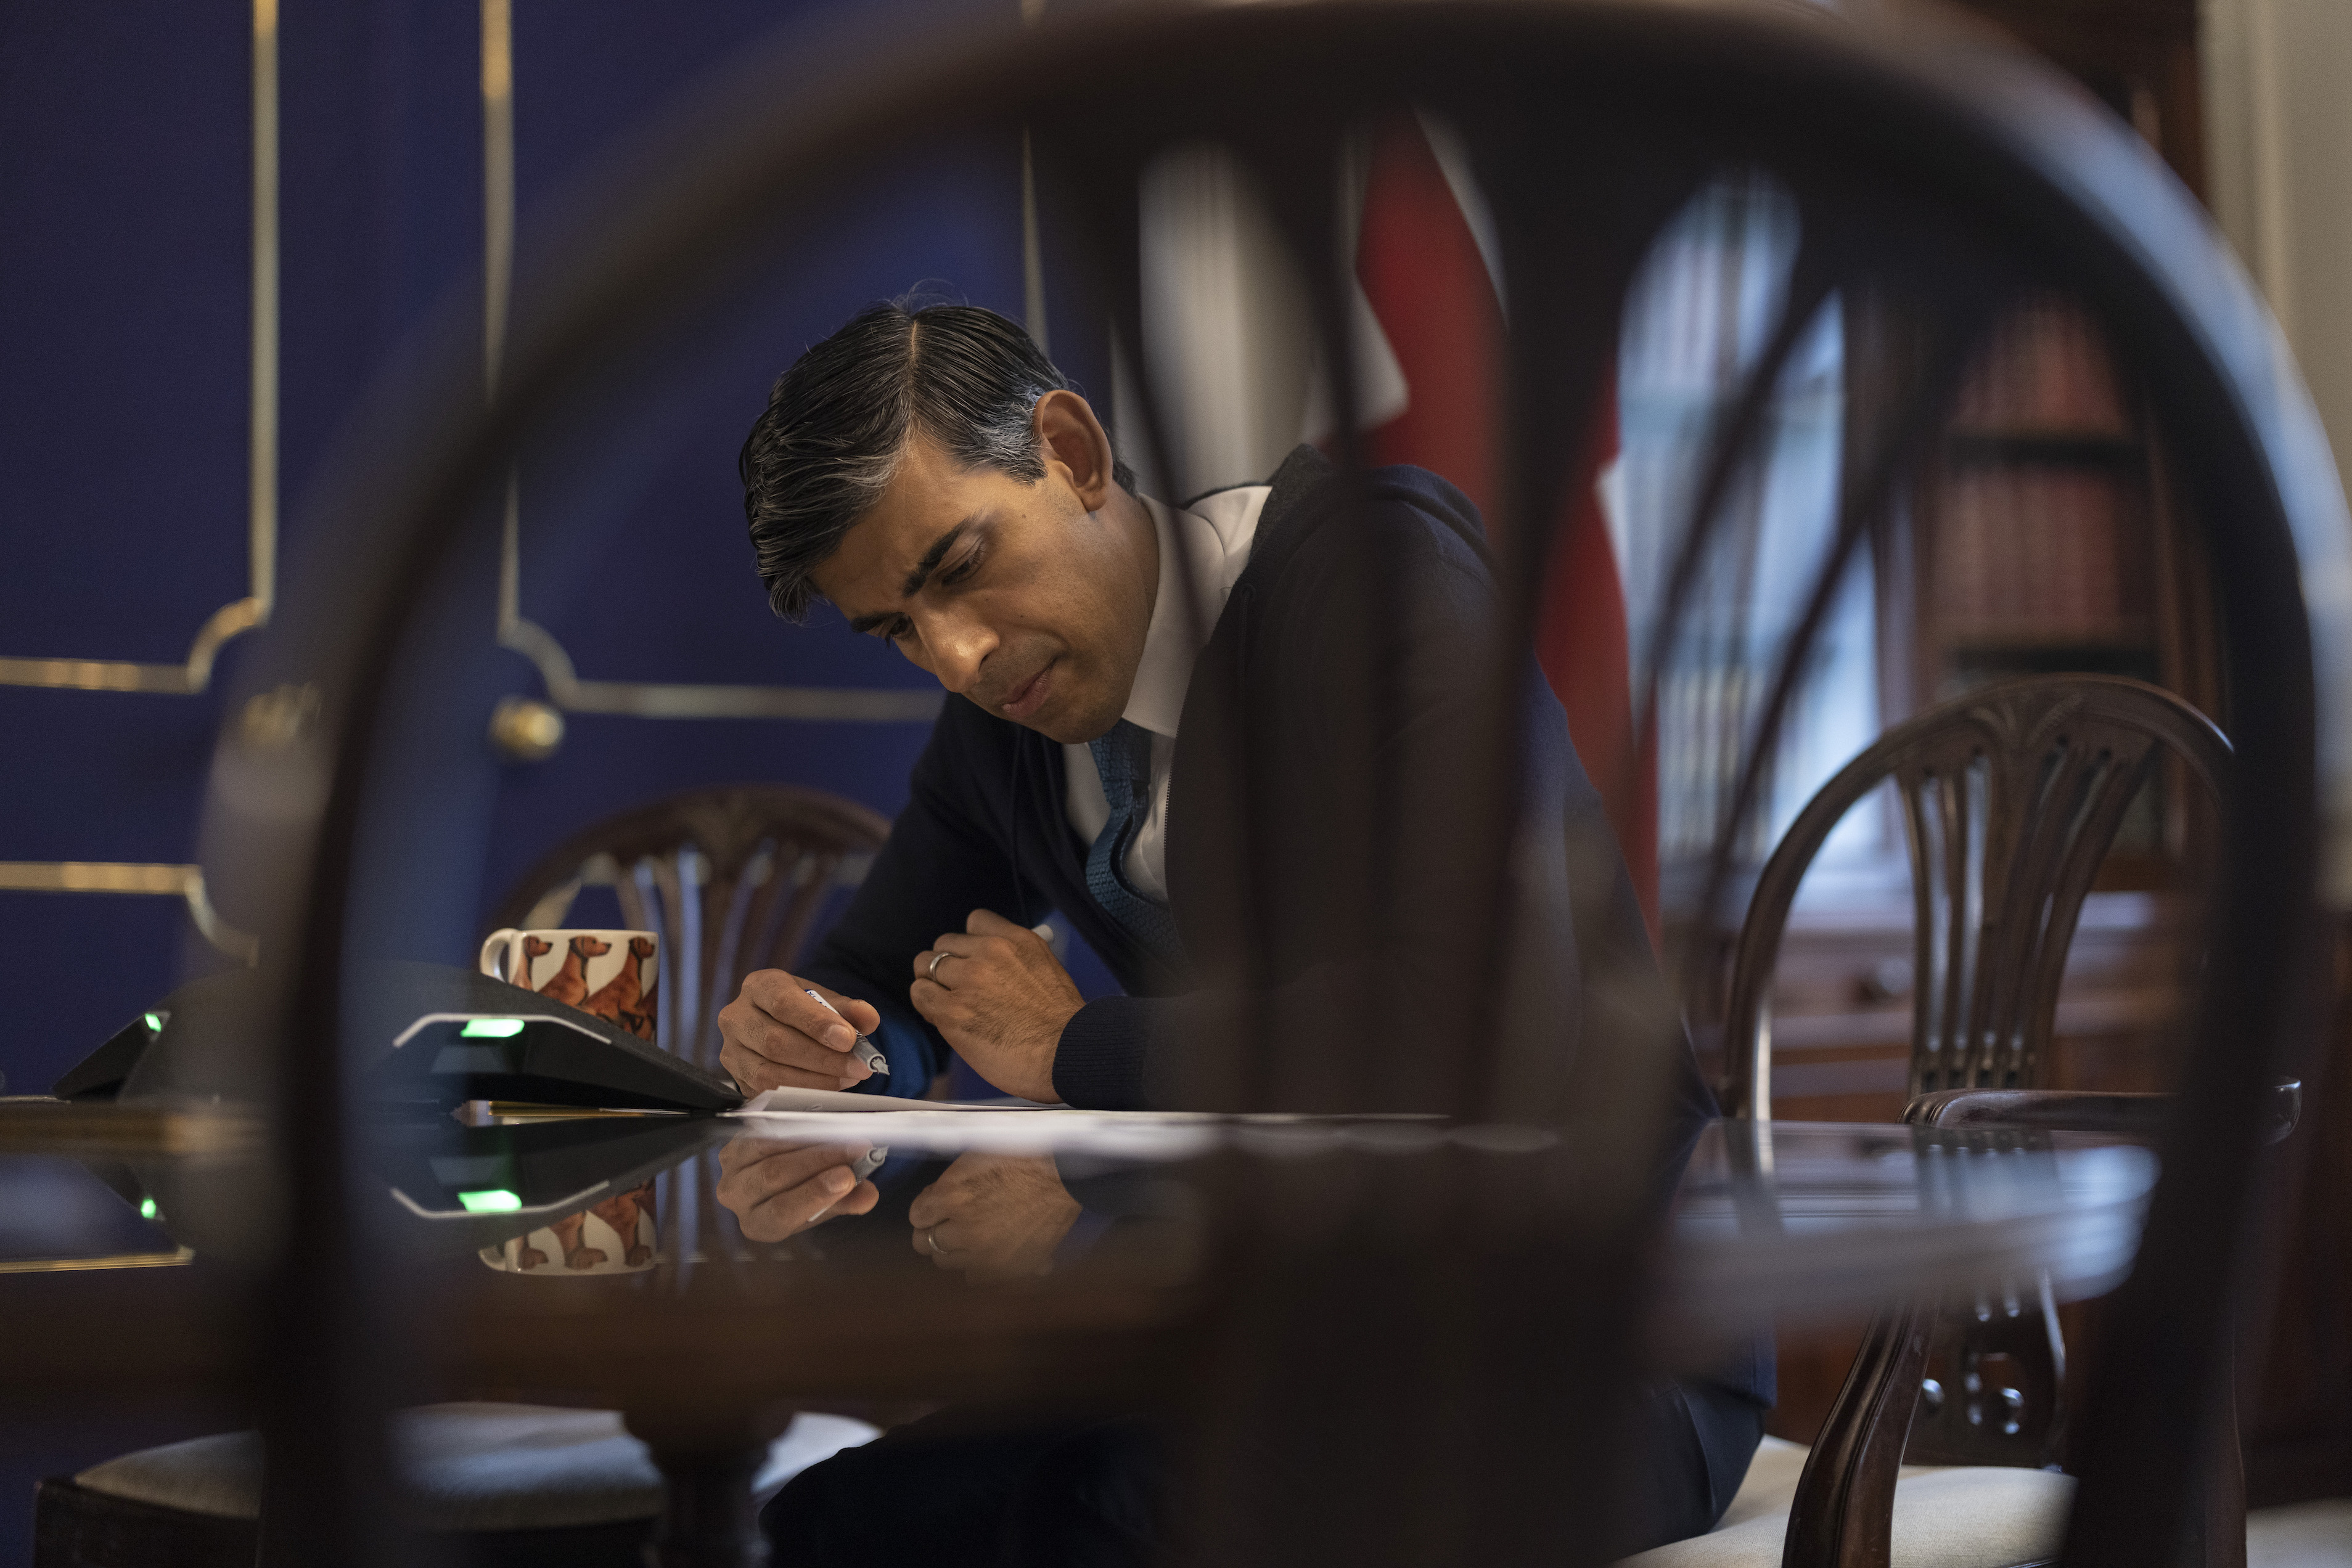 Prime Minister Rishi Sunak at his desk in Downing Street as his popularity sinks.